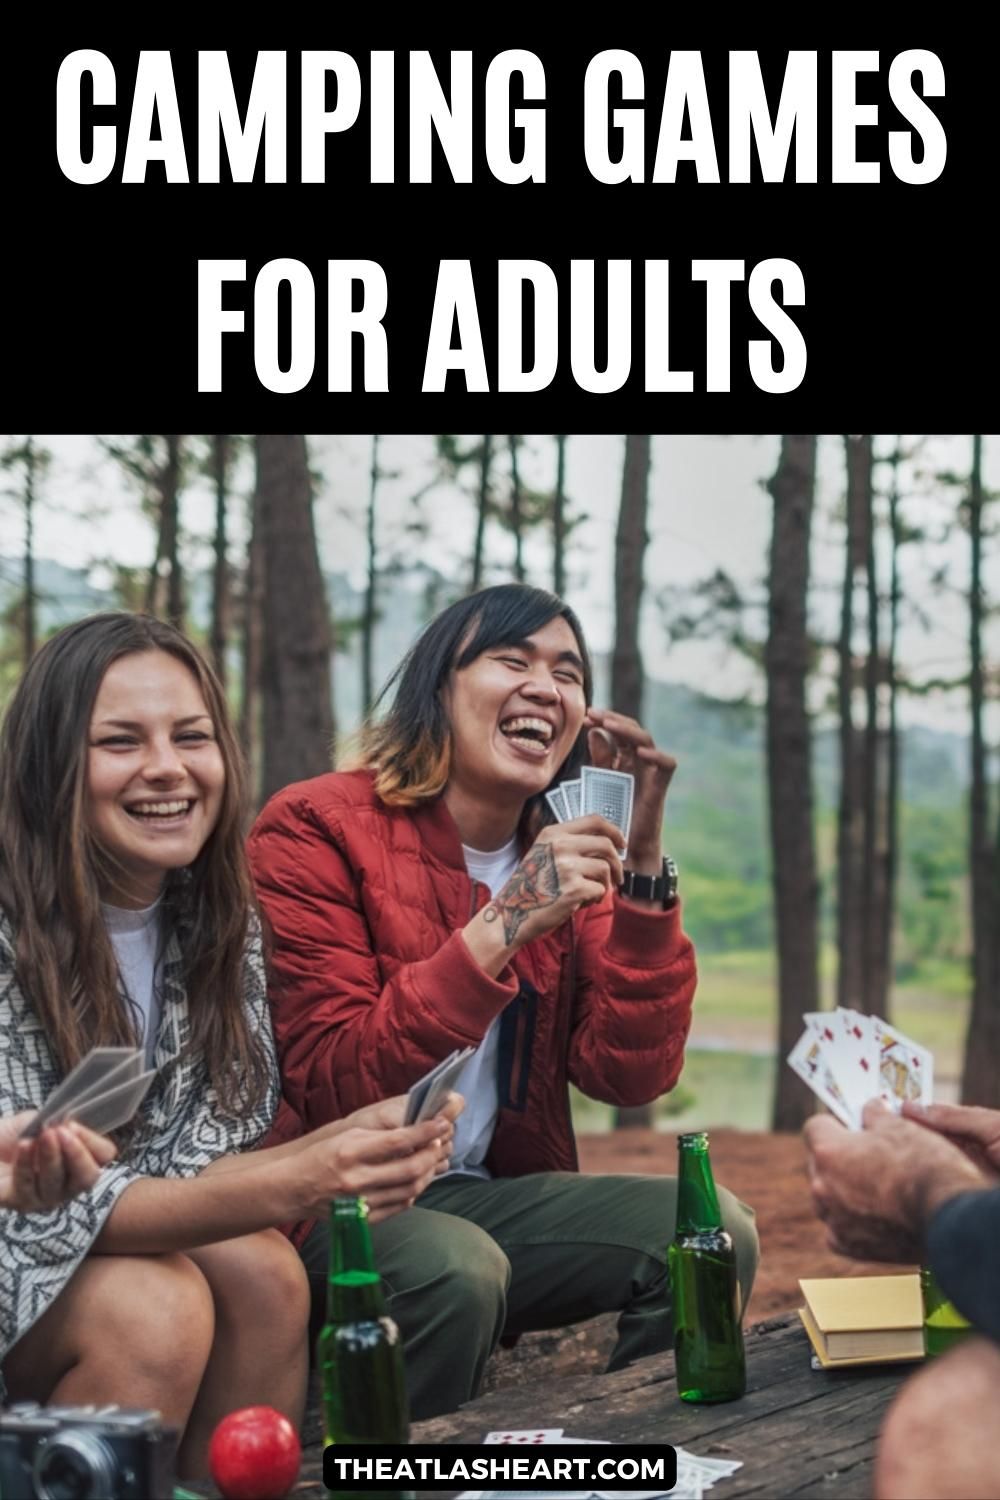 Camping Games for Adults Pin
Two friends laugh while playing a card game and drinking beer.